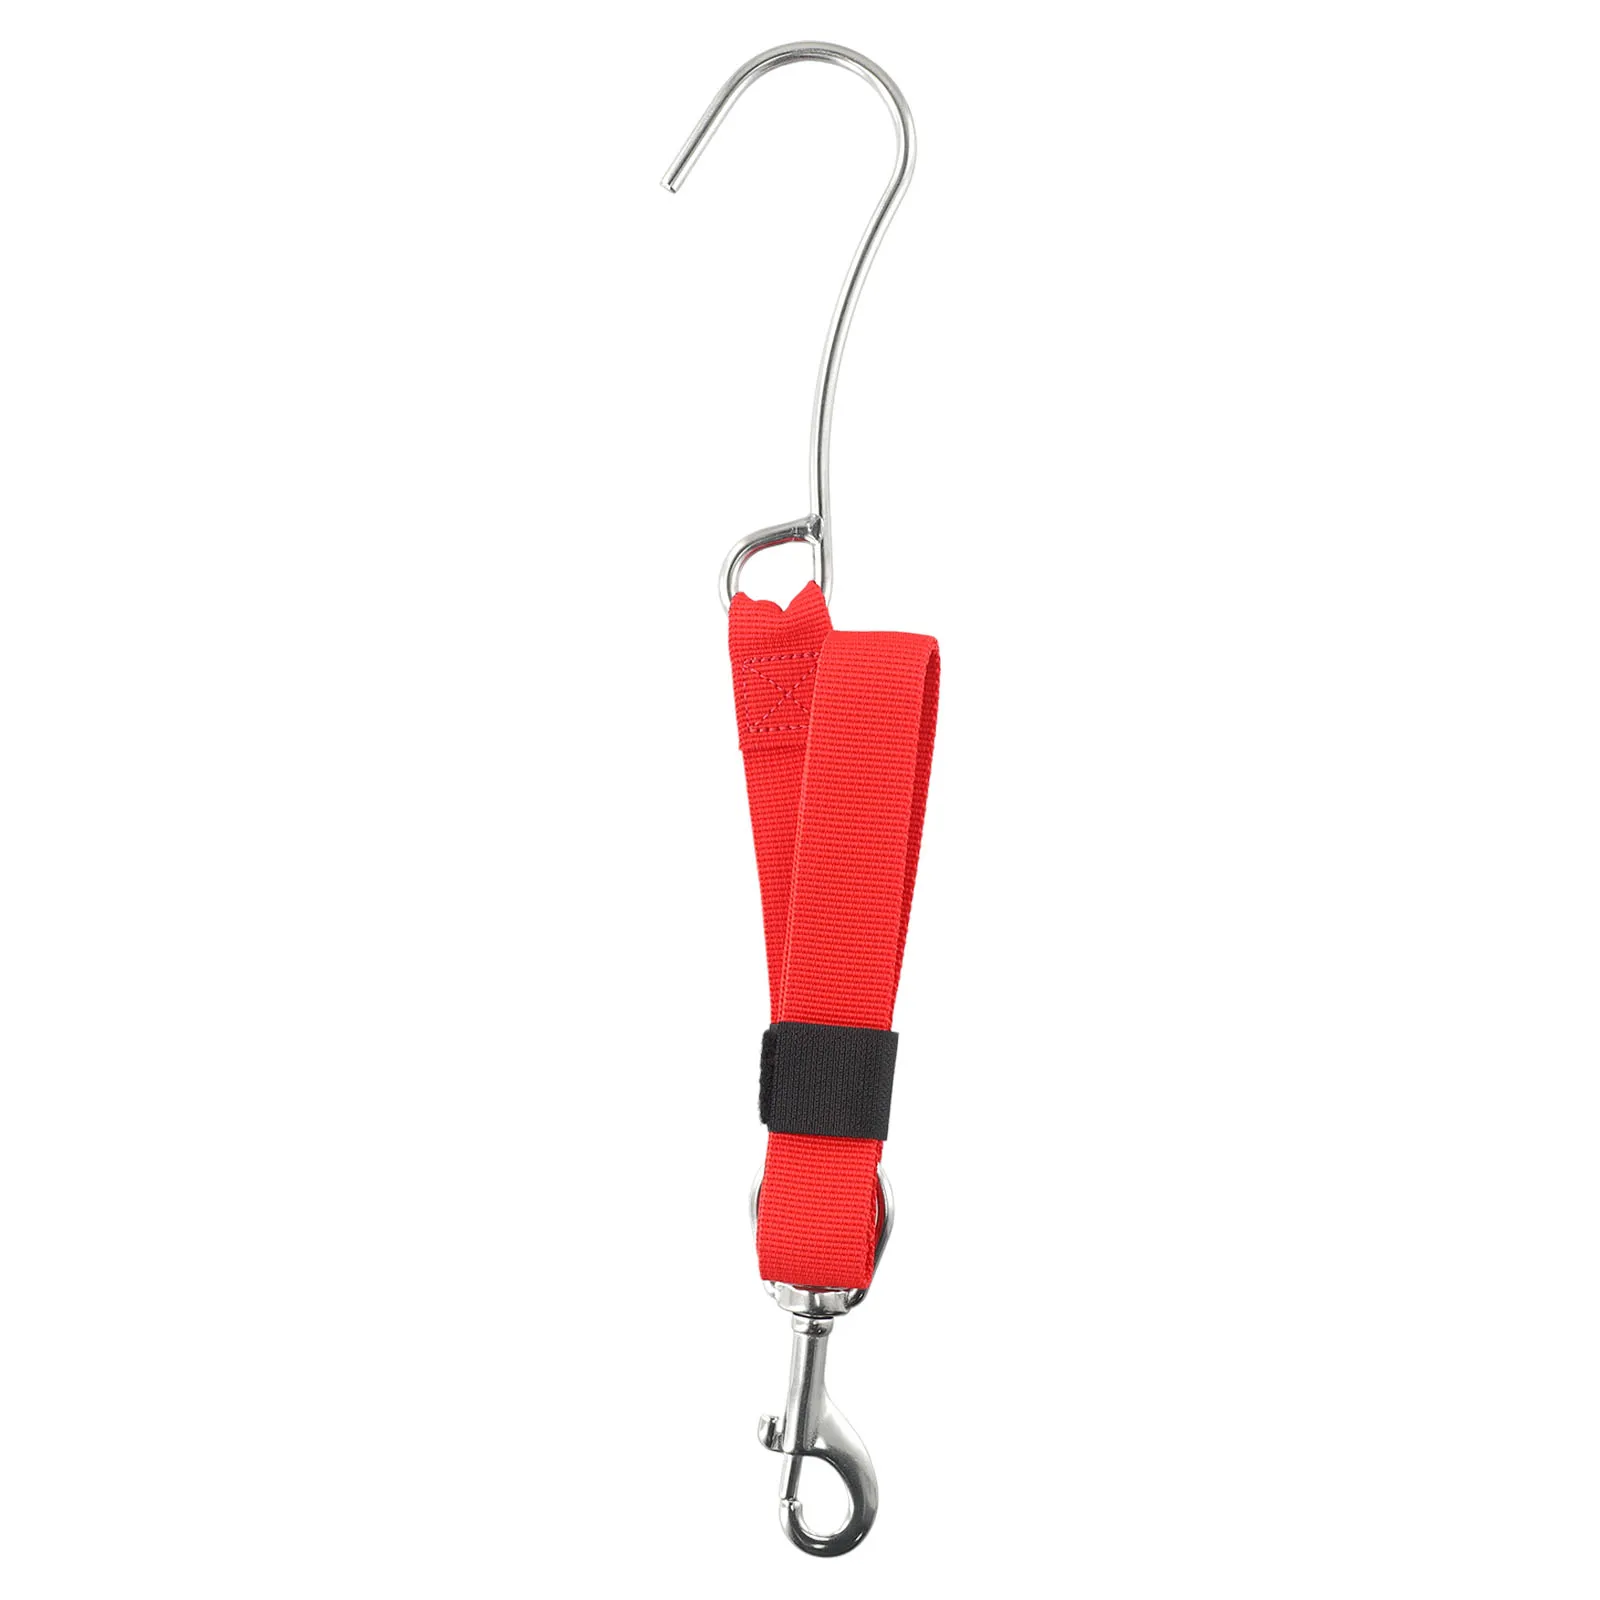 

For Underwater Photographers Single Reef Hook Single Reef Hook Single Reef Hook With Webbing Safety Gear 117g High Quality